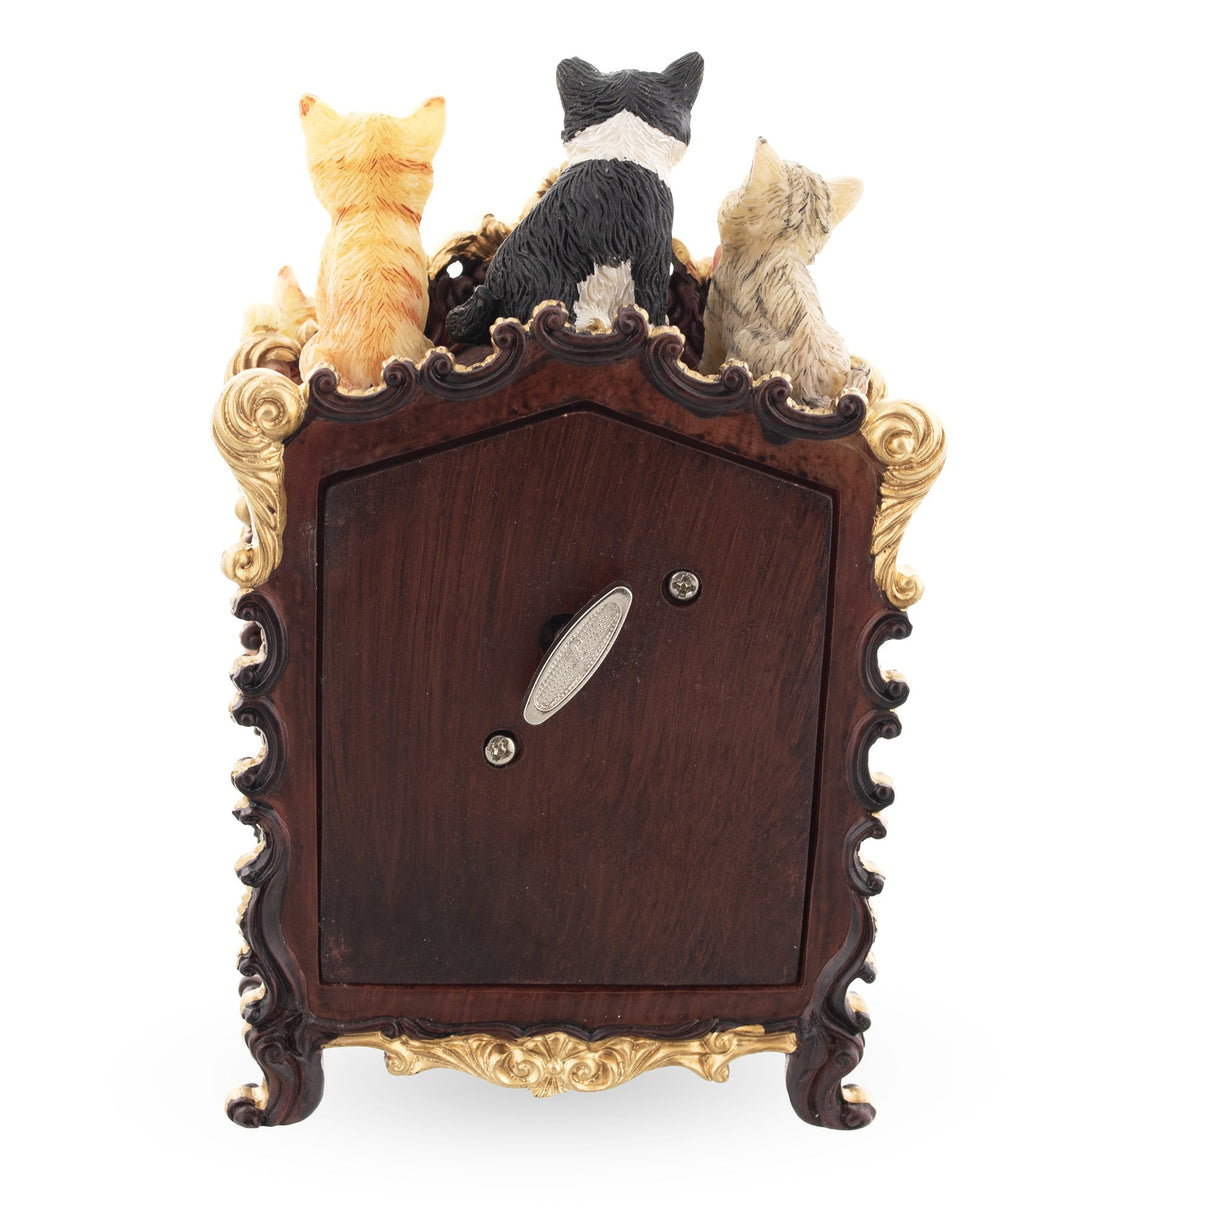 Whimsical Cat Clock Concert: Animated Musical Figurine with Playful Felines ,dimensions in inches: 6.1 x 3.3 x 4